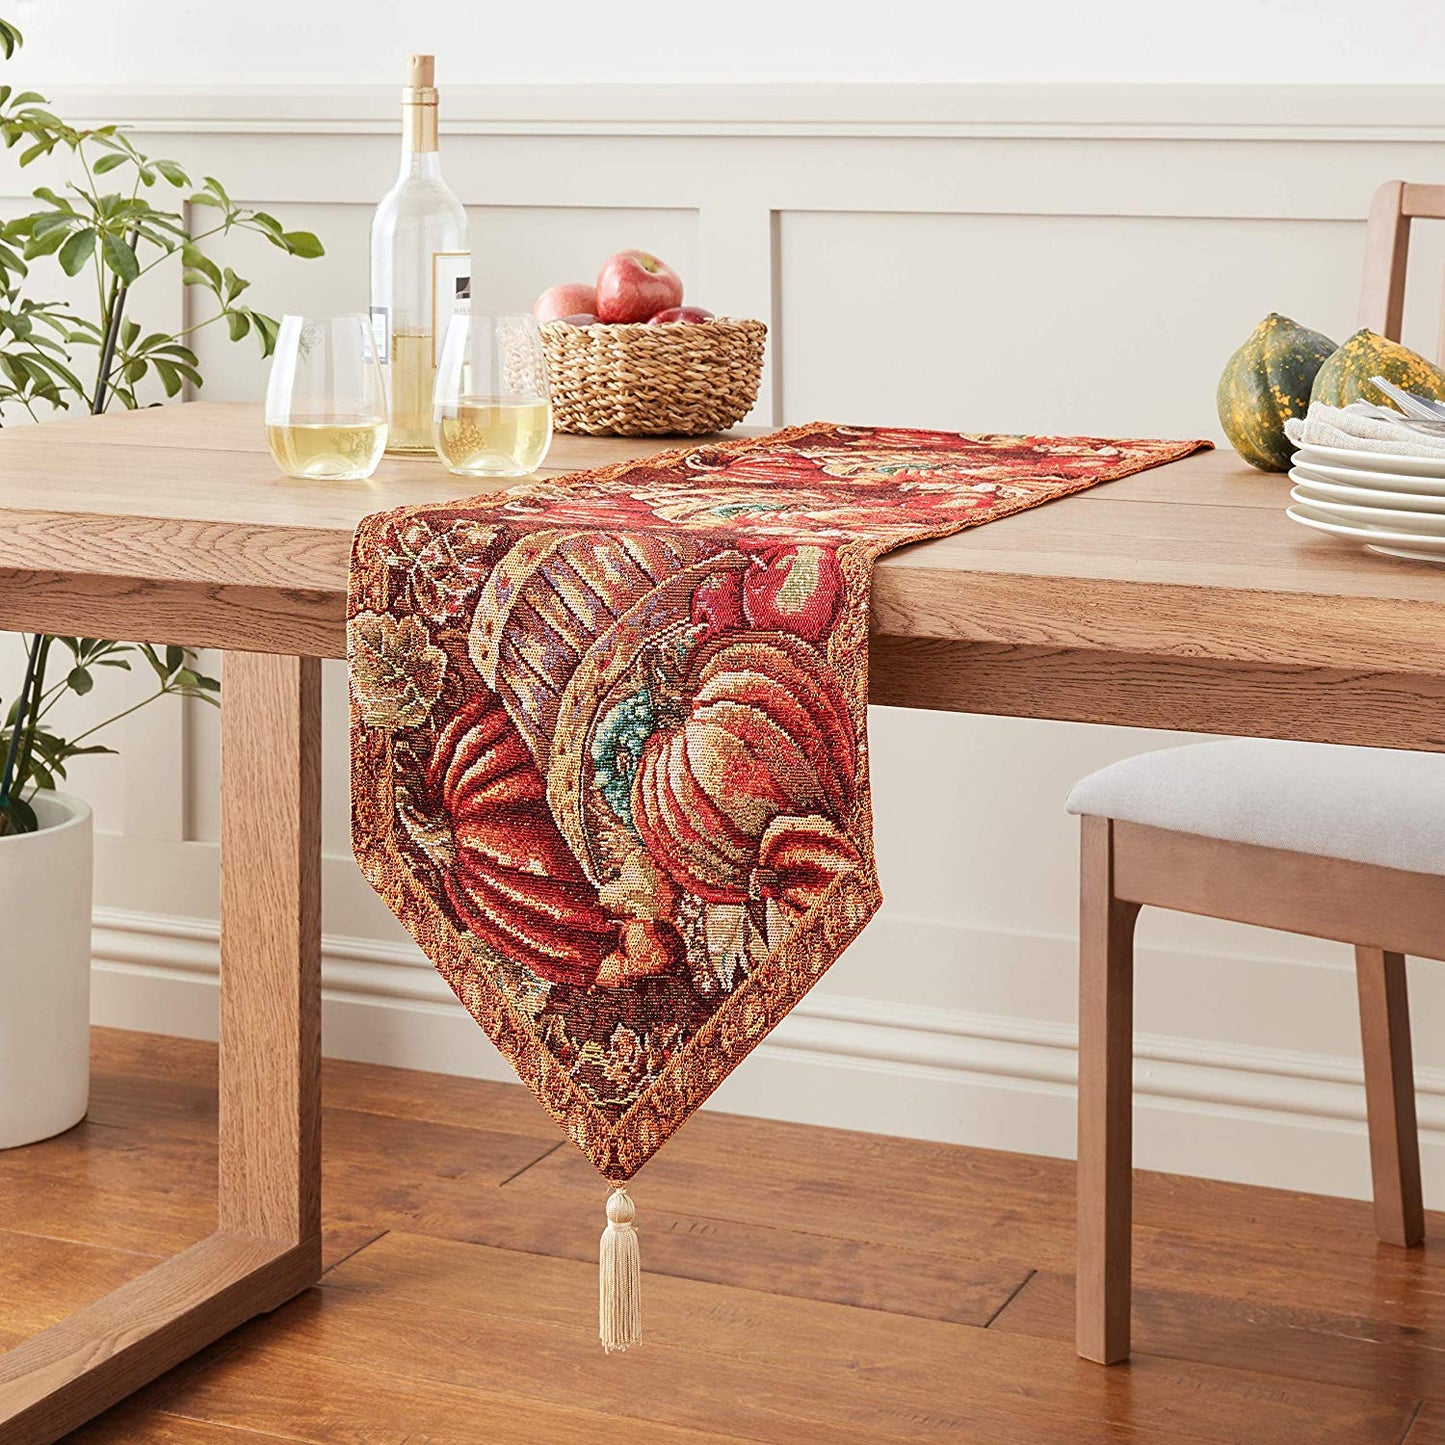 Fall Harvest Thanksgiving Autumn Leaves Sunflowers Fruits Pumpkins Tapestry Pattern Decorative Table Runner